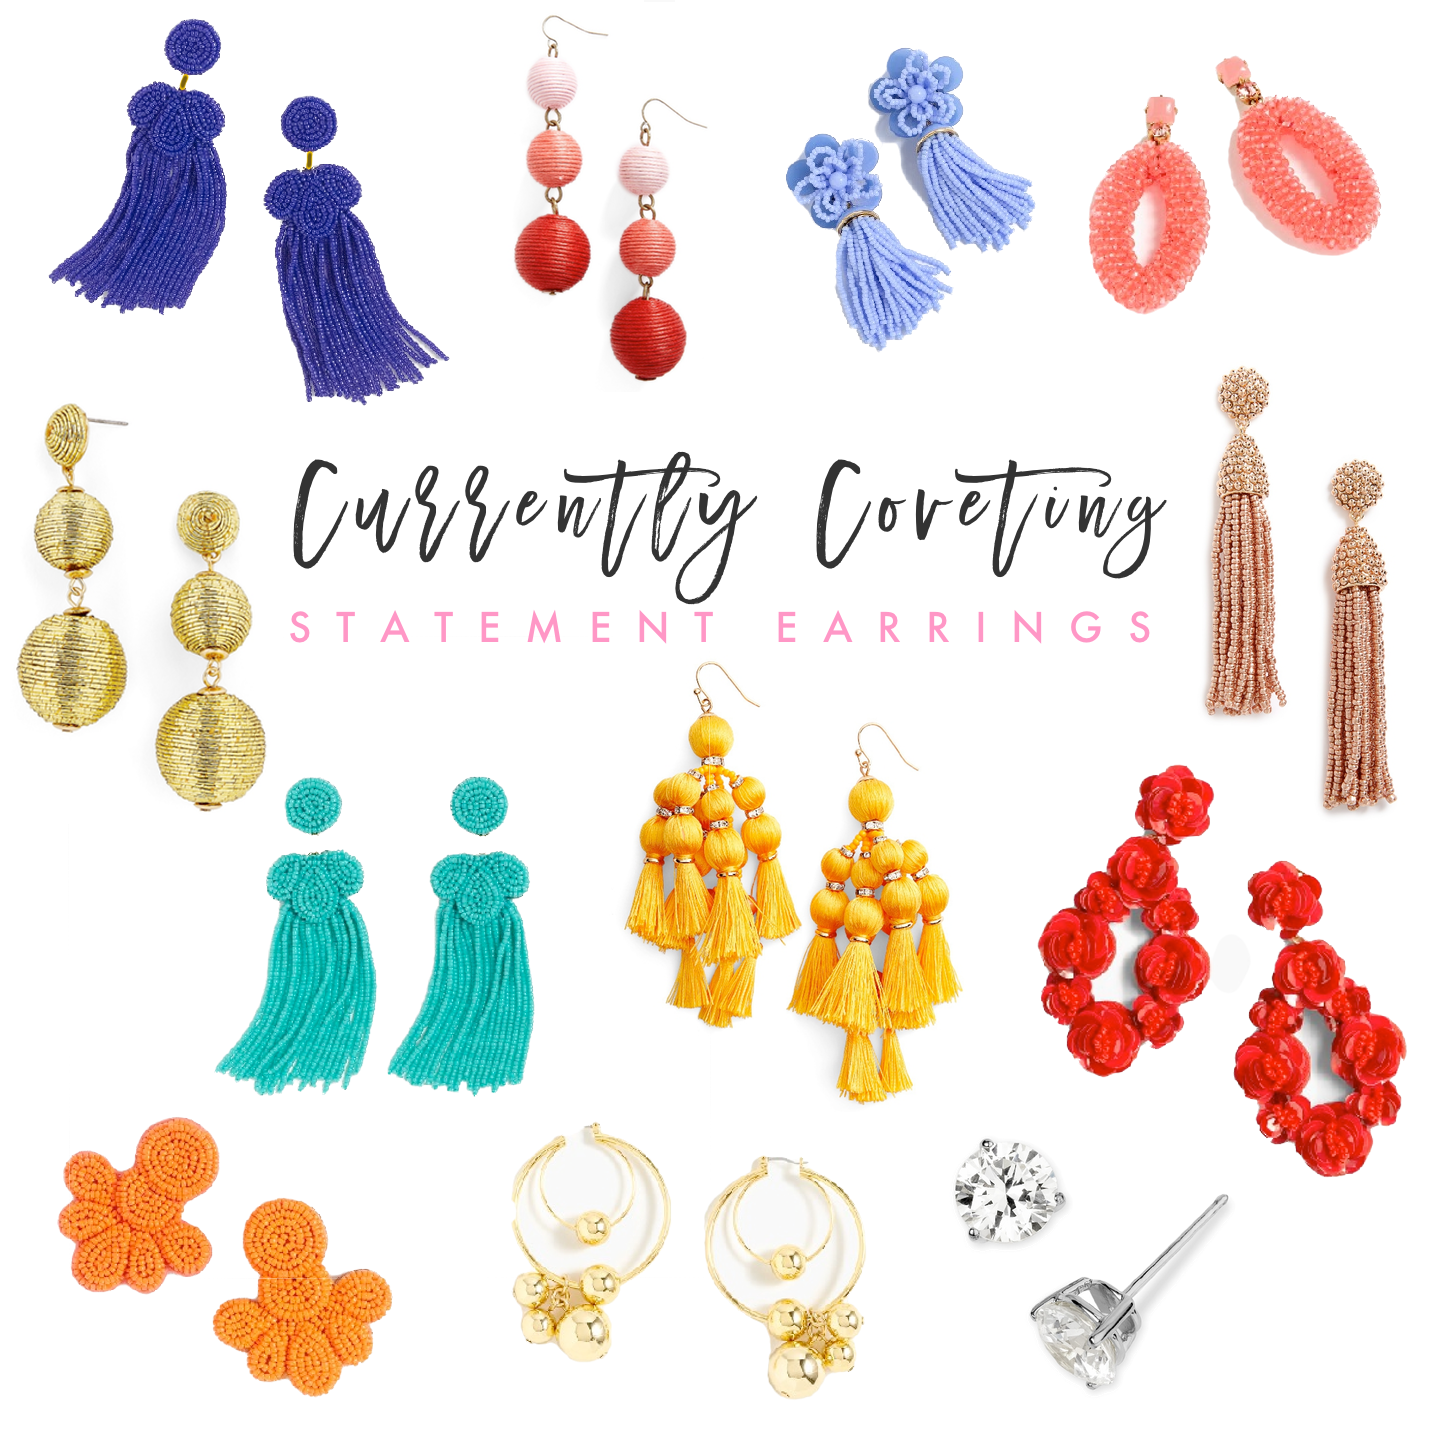 Currently Coveting: Statement Earrings